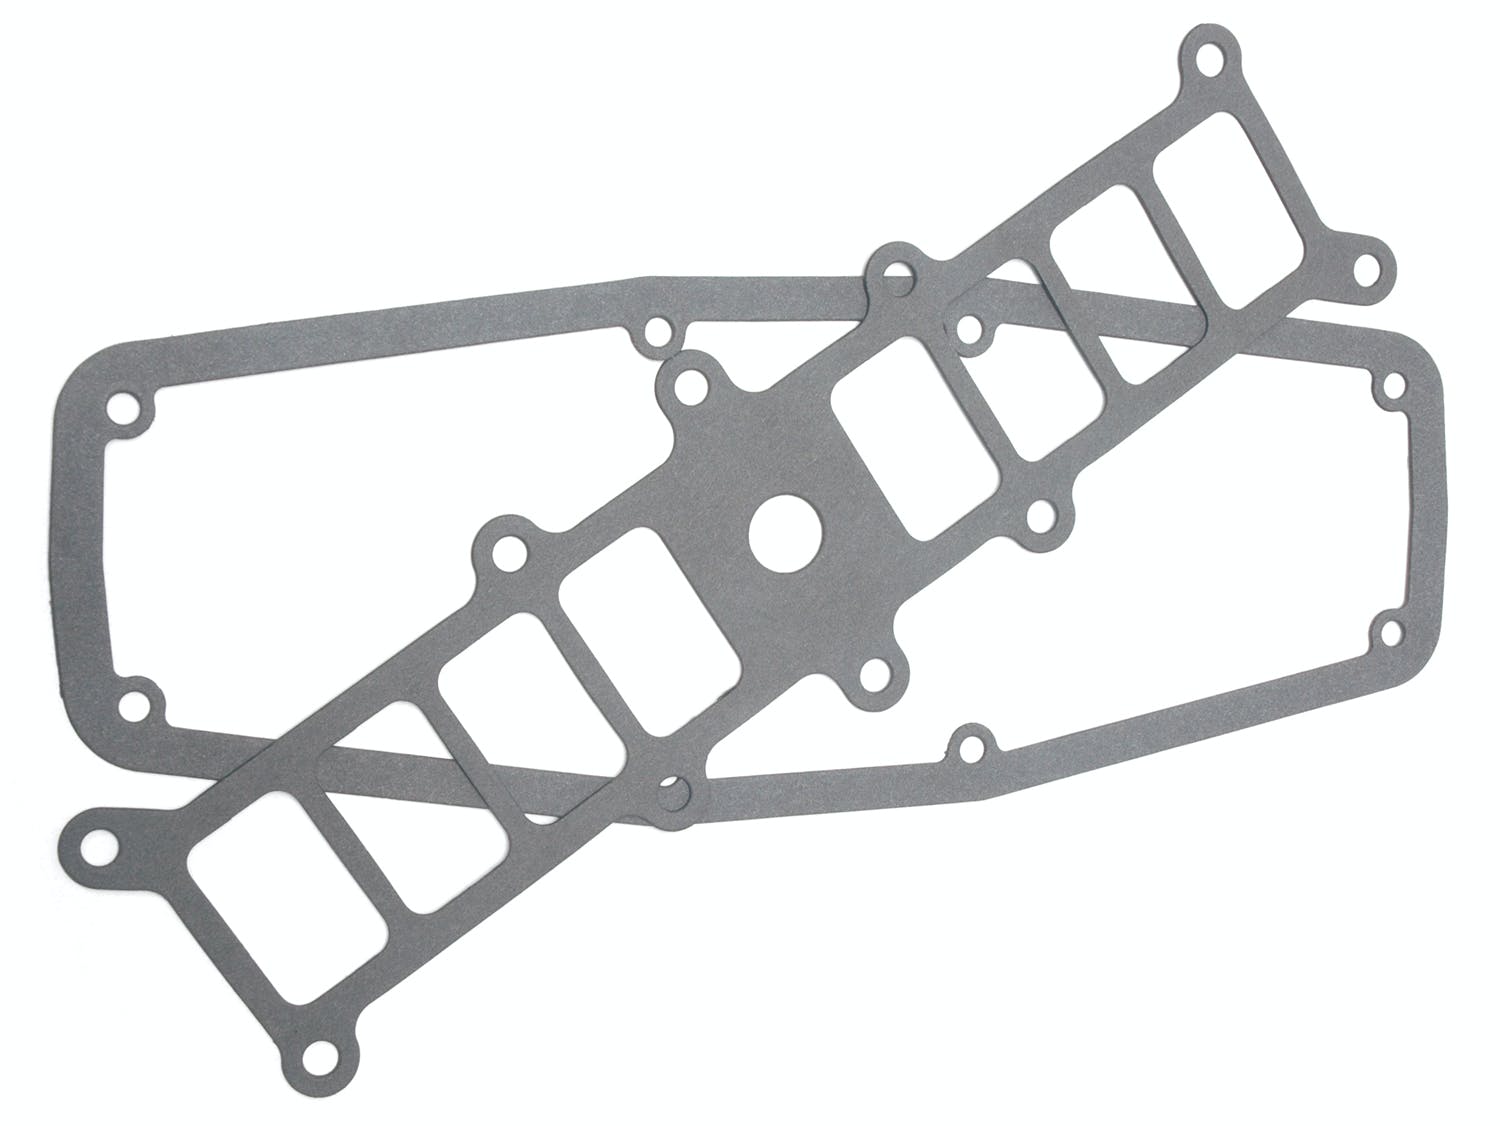 Edelbrock 3832 Intake Manifold replacement base and plenum cover gaskets